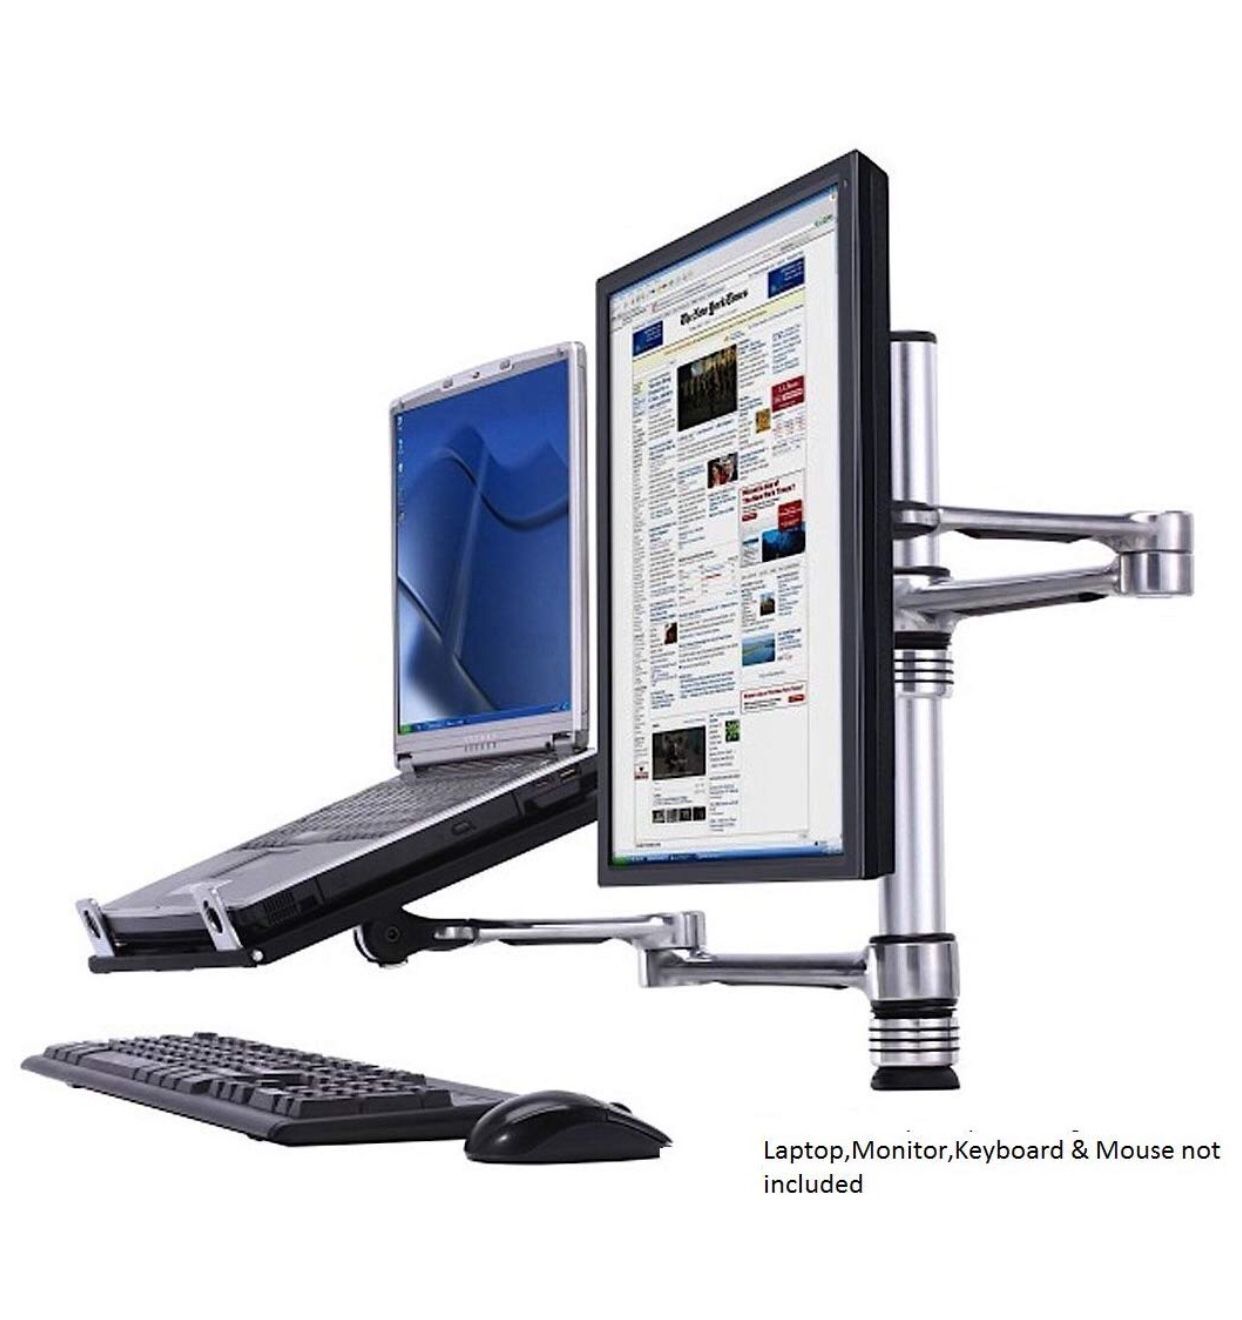 Laptop Stand/Monitor Mount - BRAND NEW STILL IN BOX